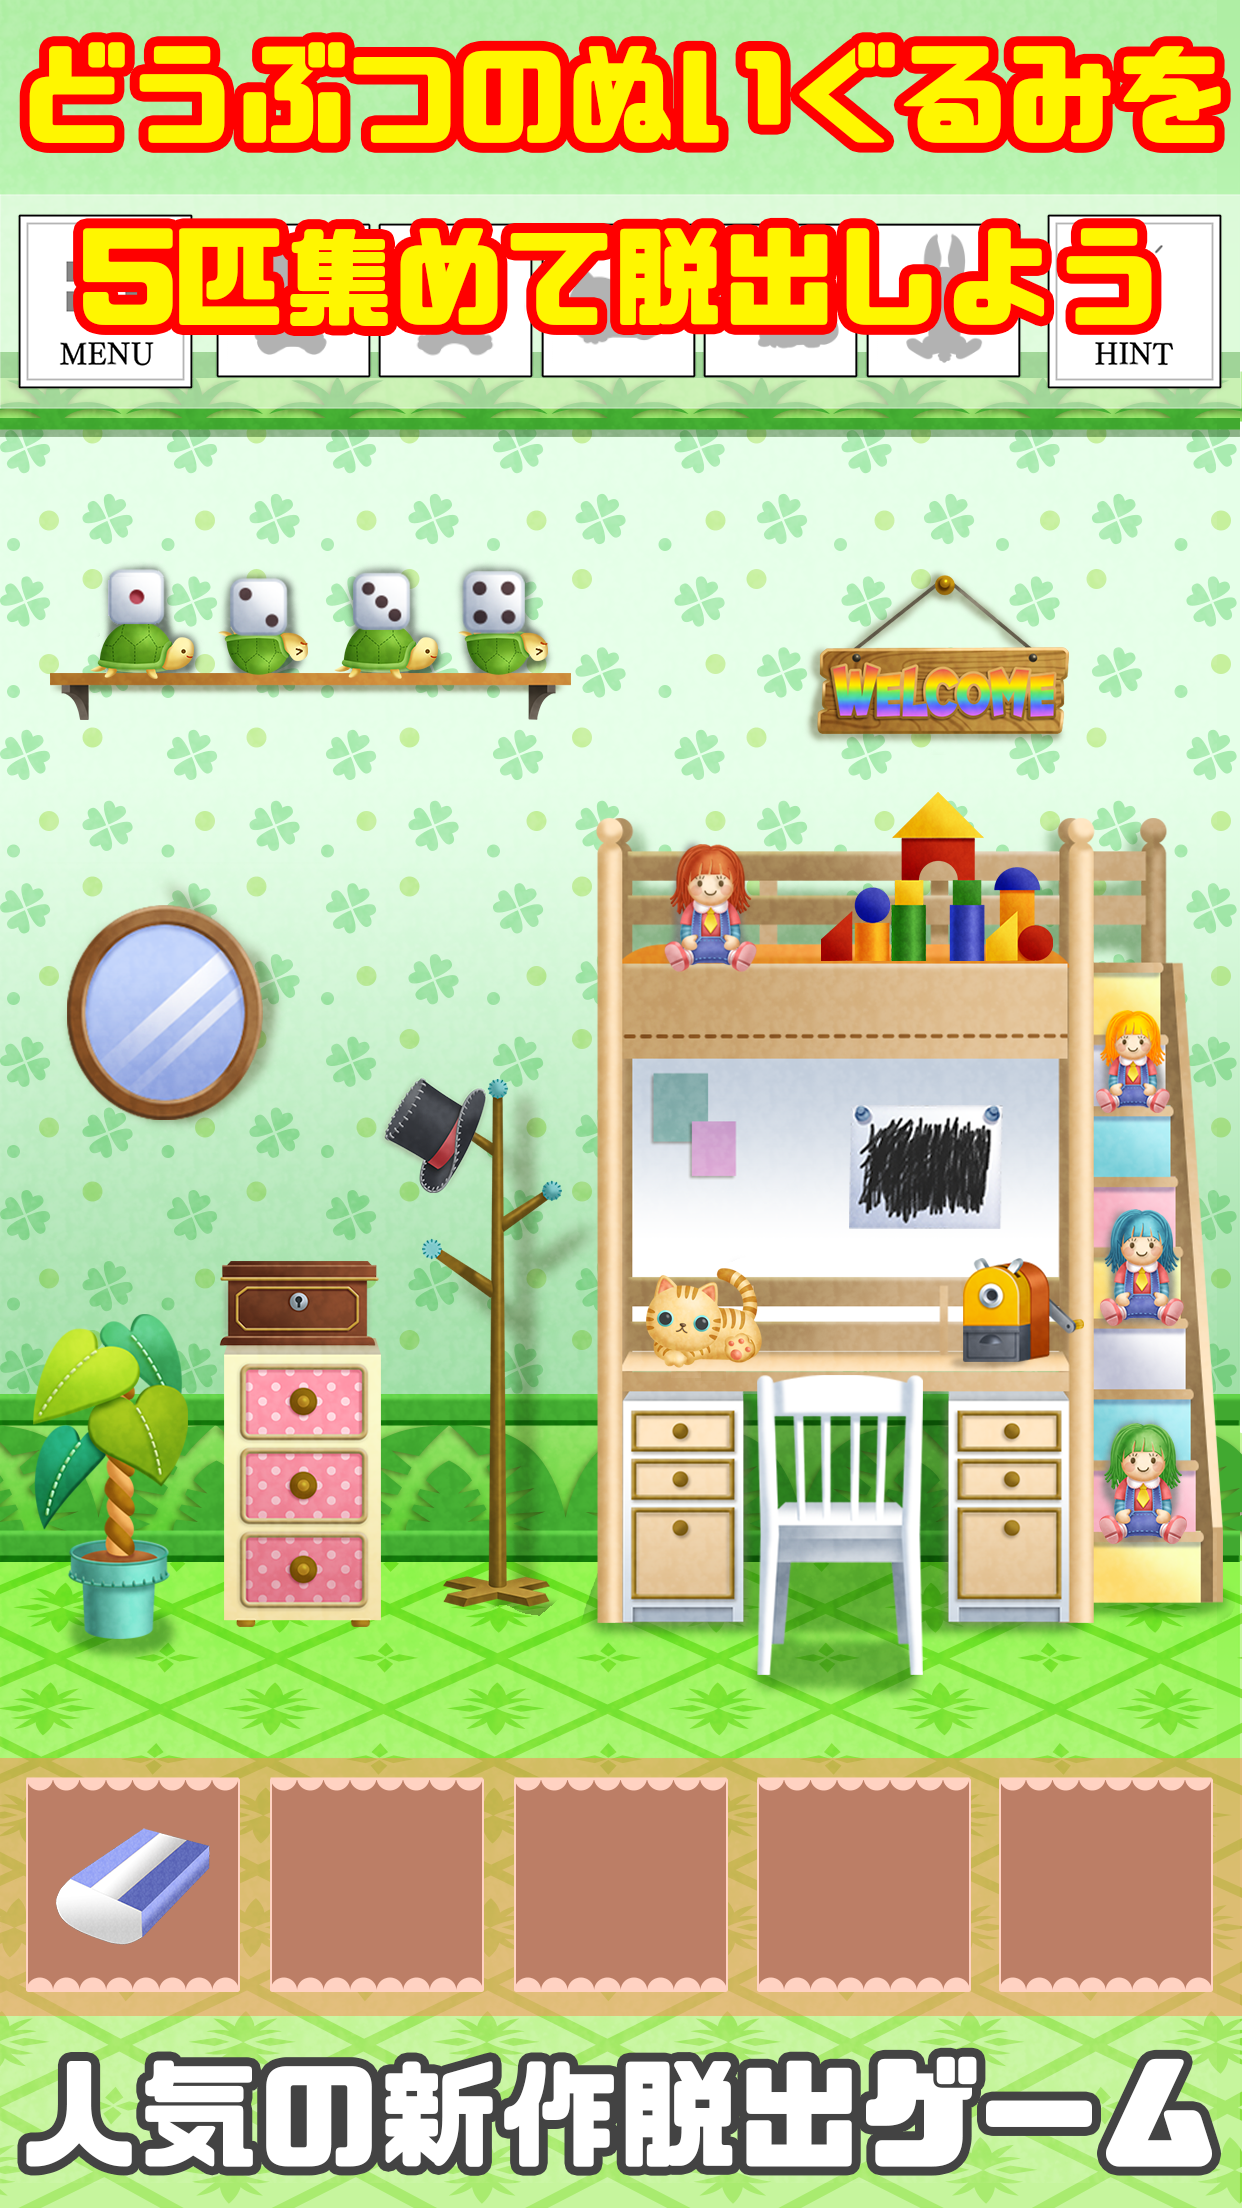 Screenshot 1 of Escape Game -Tower of Stuffed Toys Bagong Popular Animal Escape Edition- 1.0